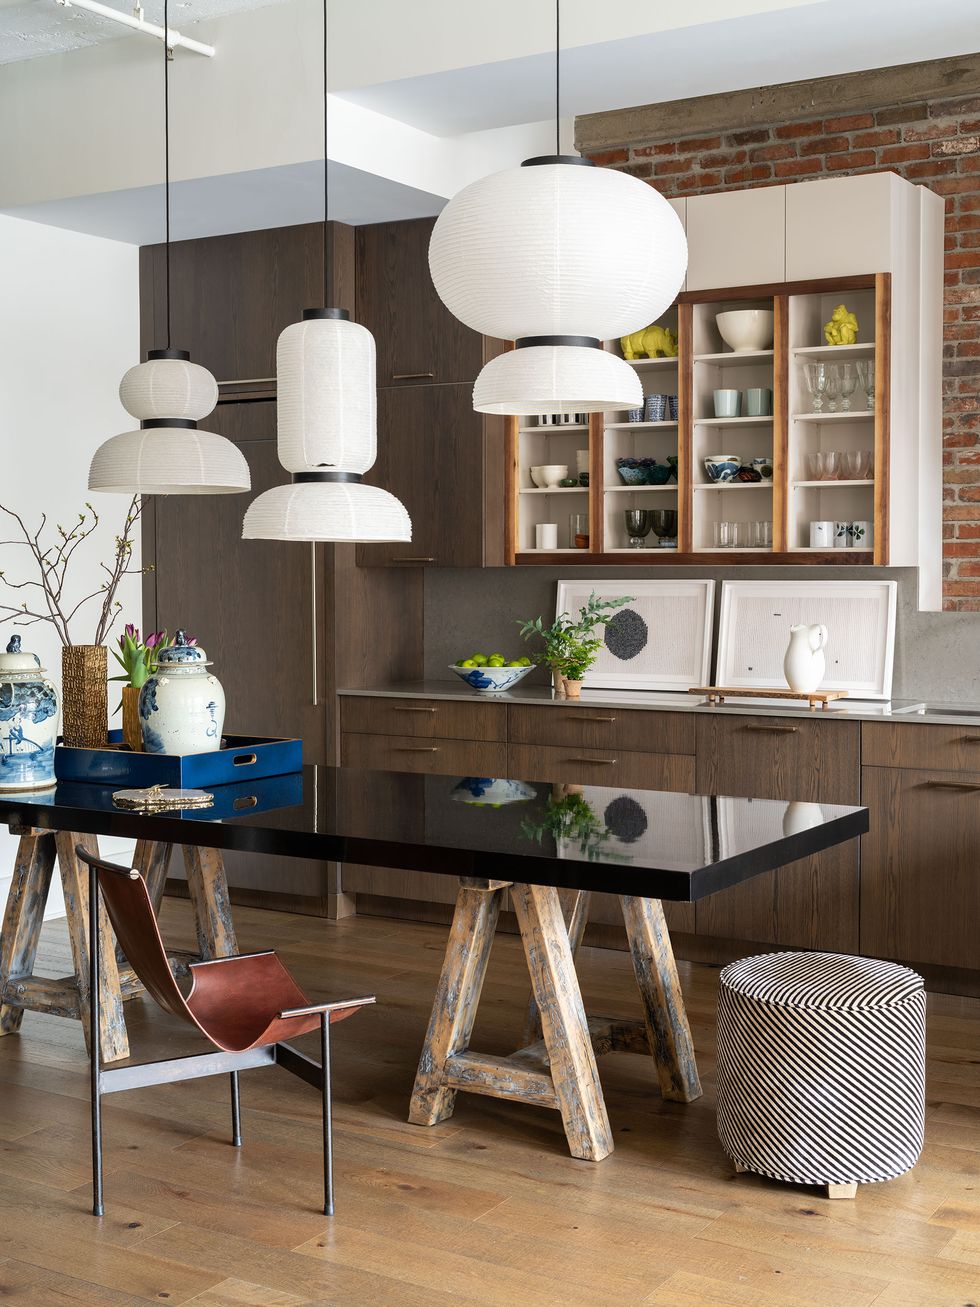 kitchen with a long shiny black table on distressed saw horse legs at center and a striped pouf and thin legged brown chair pulled up to it sleek modern counters are against the wall with framed prints on them leaning against the wall